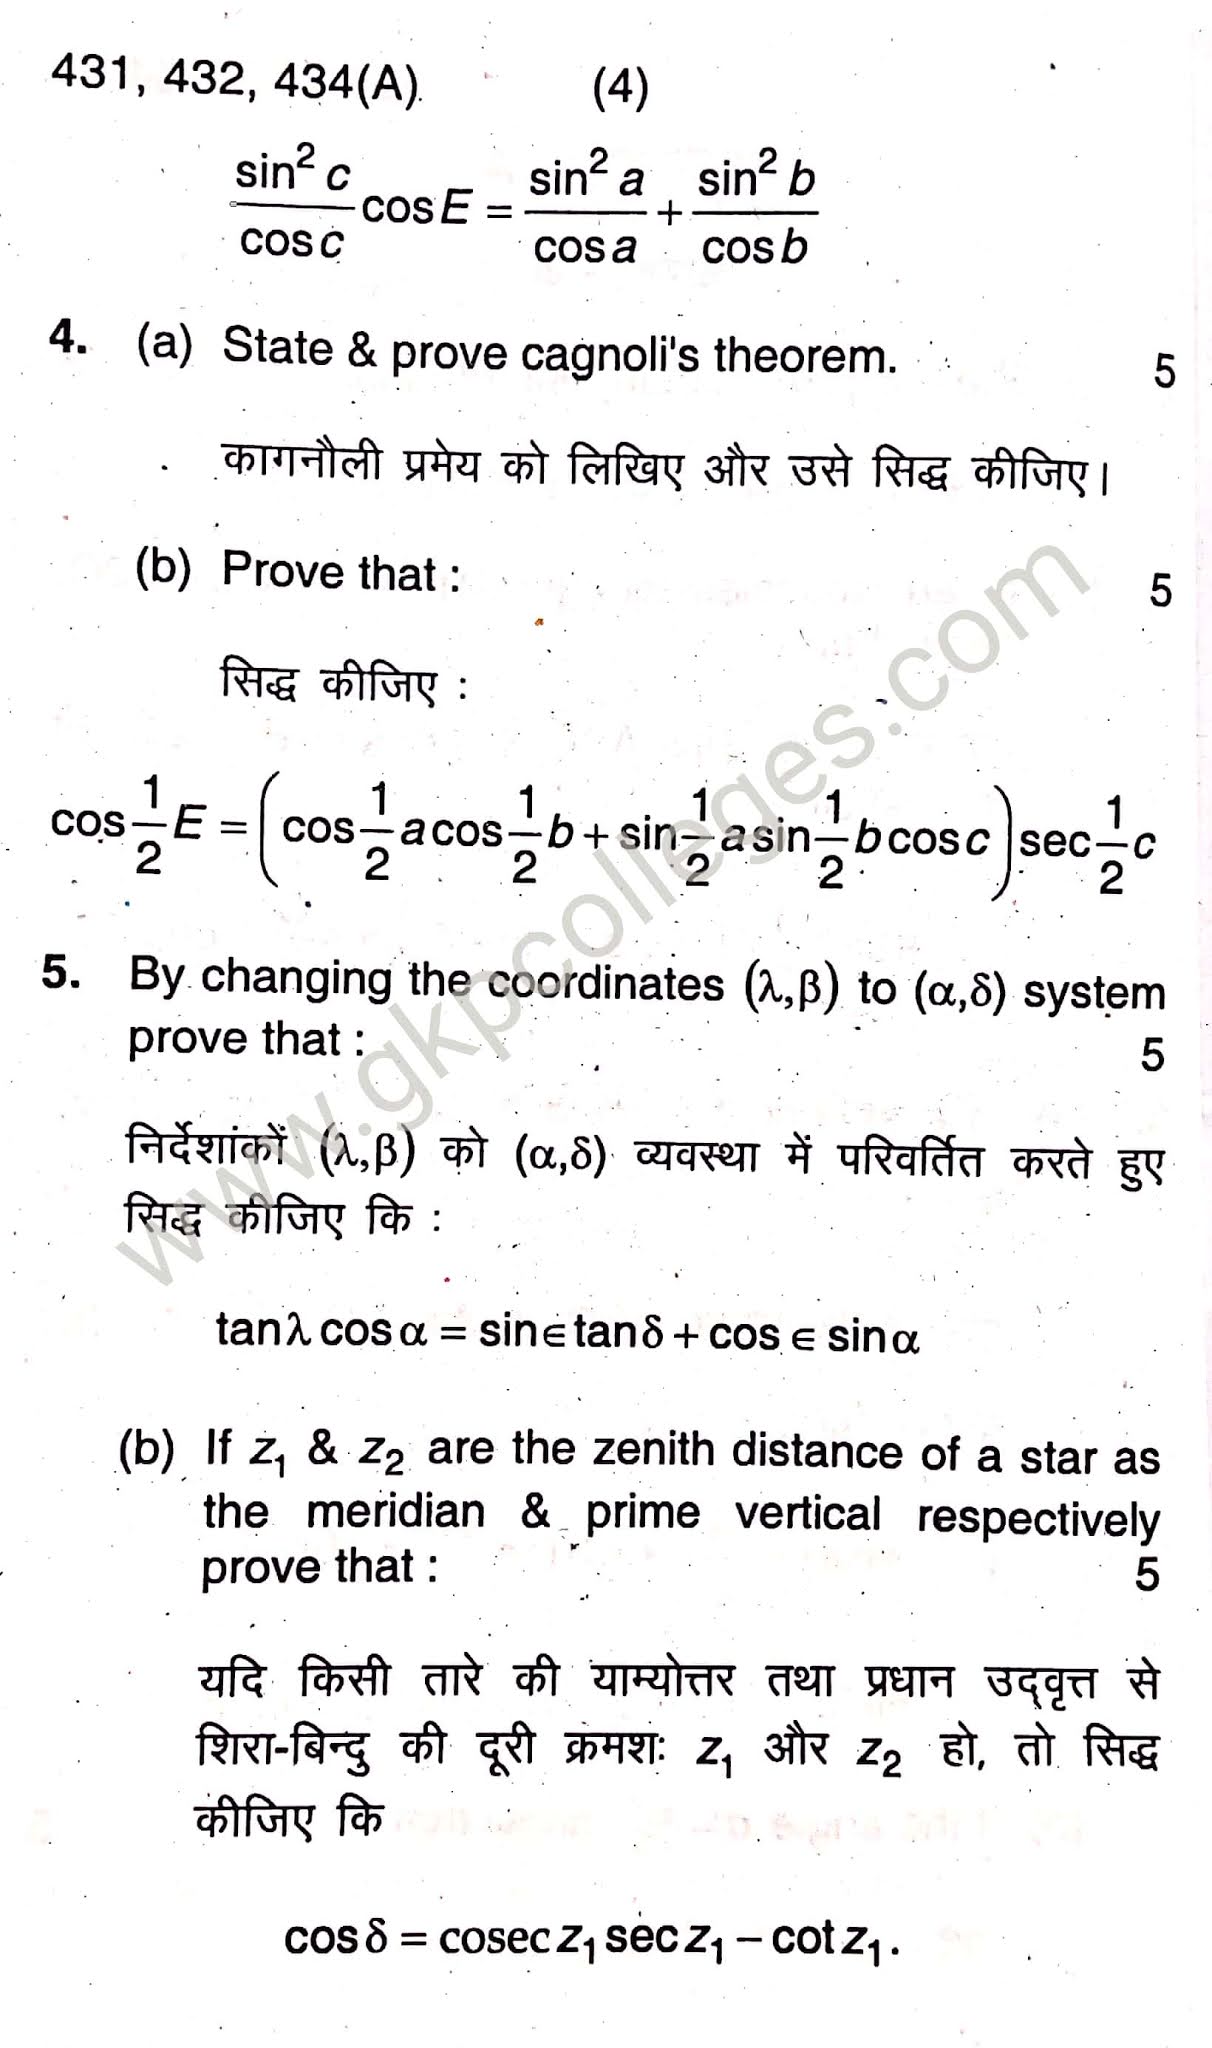 Linear Programming and Game Theory, Mathematics Paper- 5th for B.Sc. 3rd year students, DDU Gorakhpur University Examination 2020